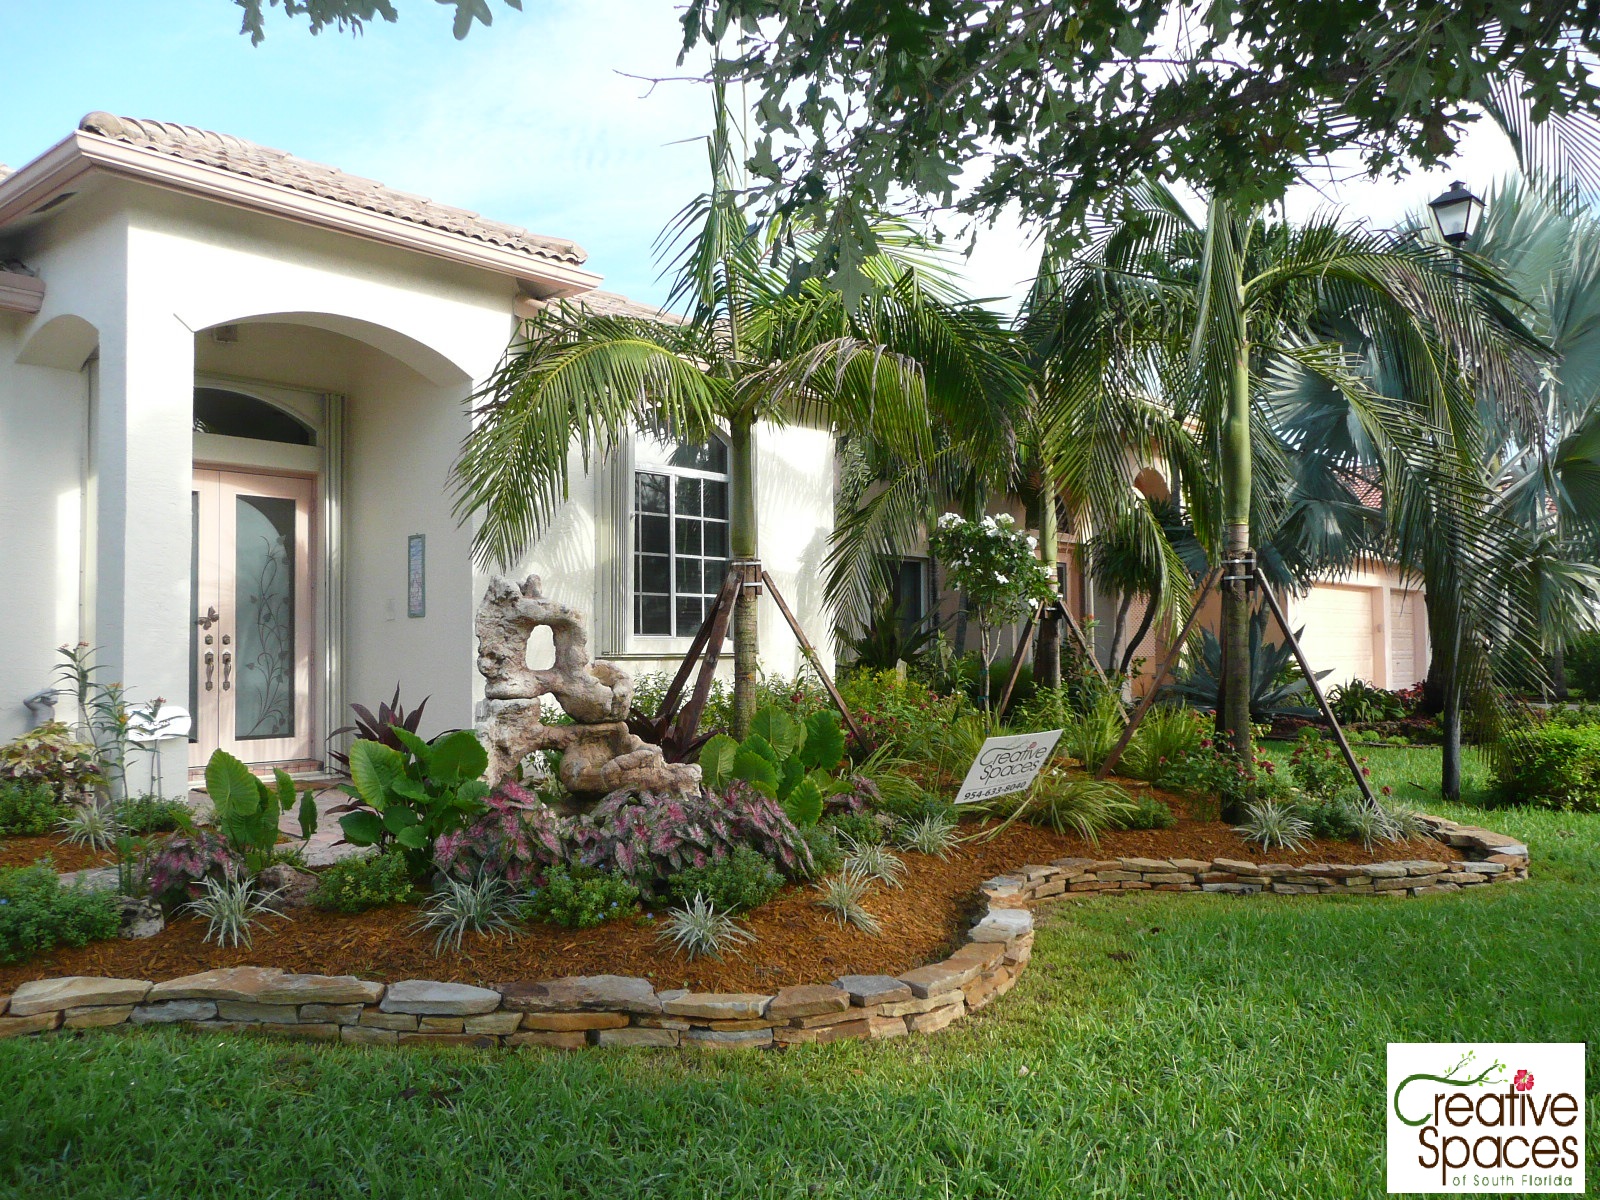 Landscaping: Landscaping Ideas For Front Yard In South Florida